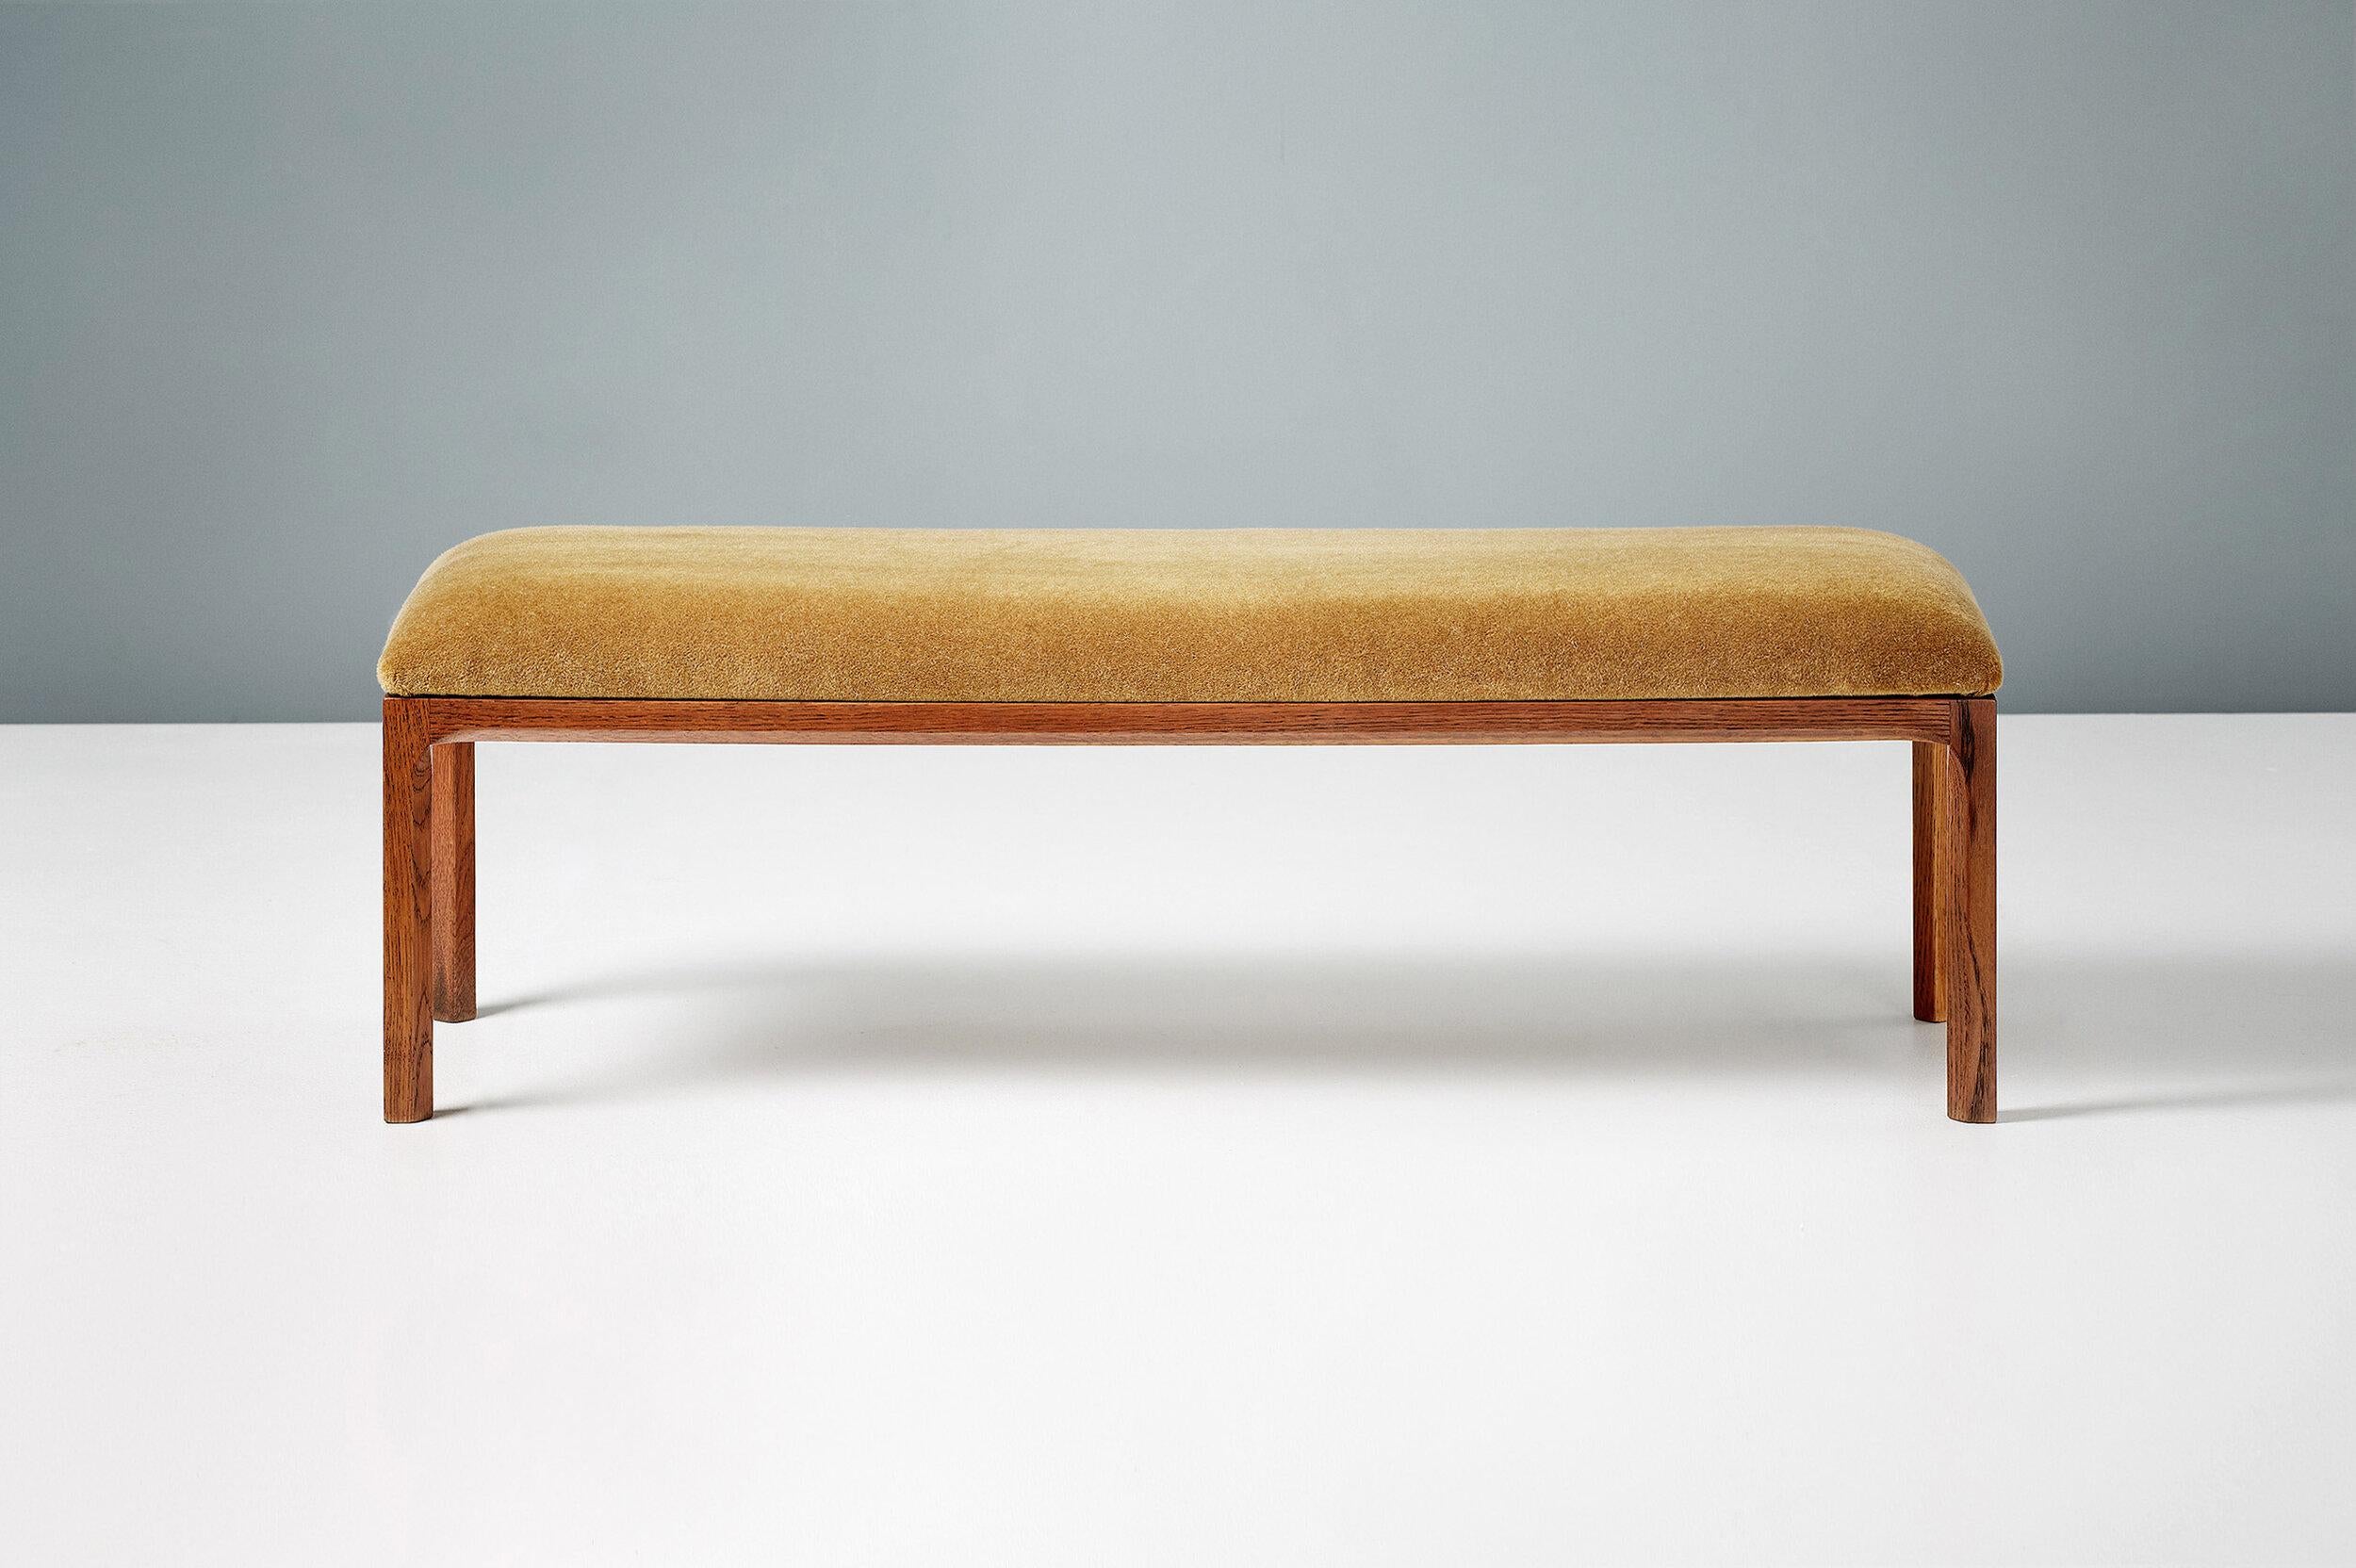 A custom-made upholstered bench with fumed and oiled oak frame. The padded top has been upholstered with in Pierre Frey mustard mohair velvet. 

*Alternative upholstery options also available by request. 

Measures: Length 118cm
Height